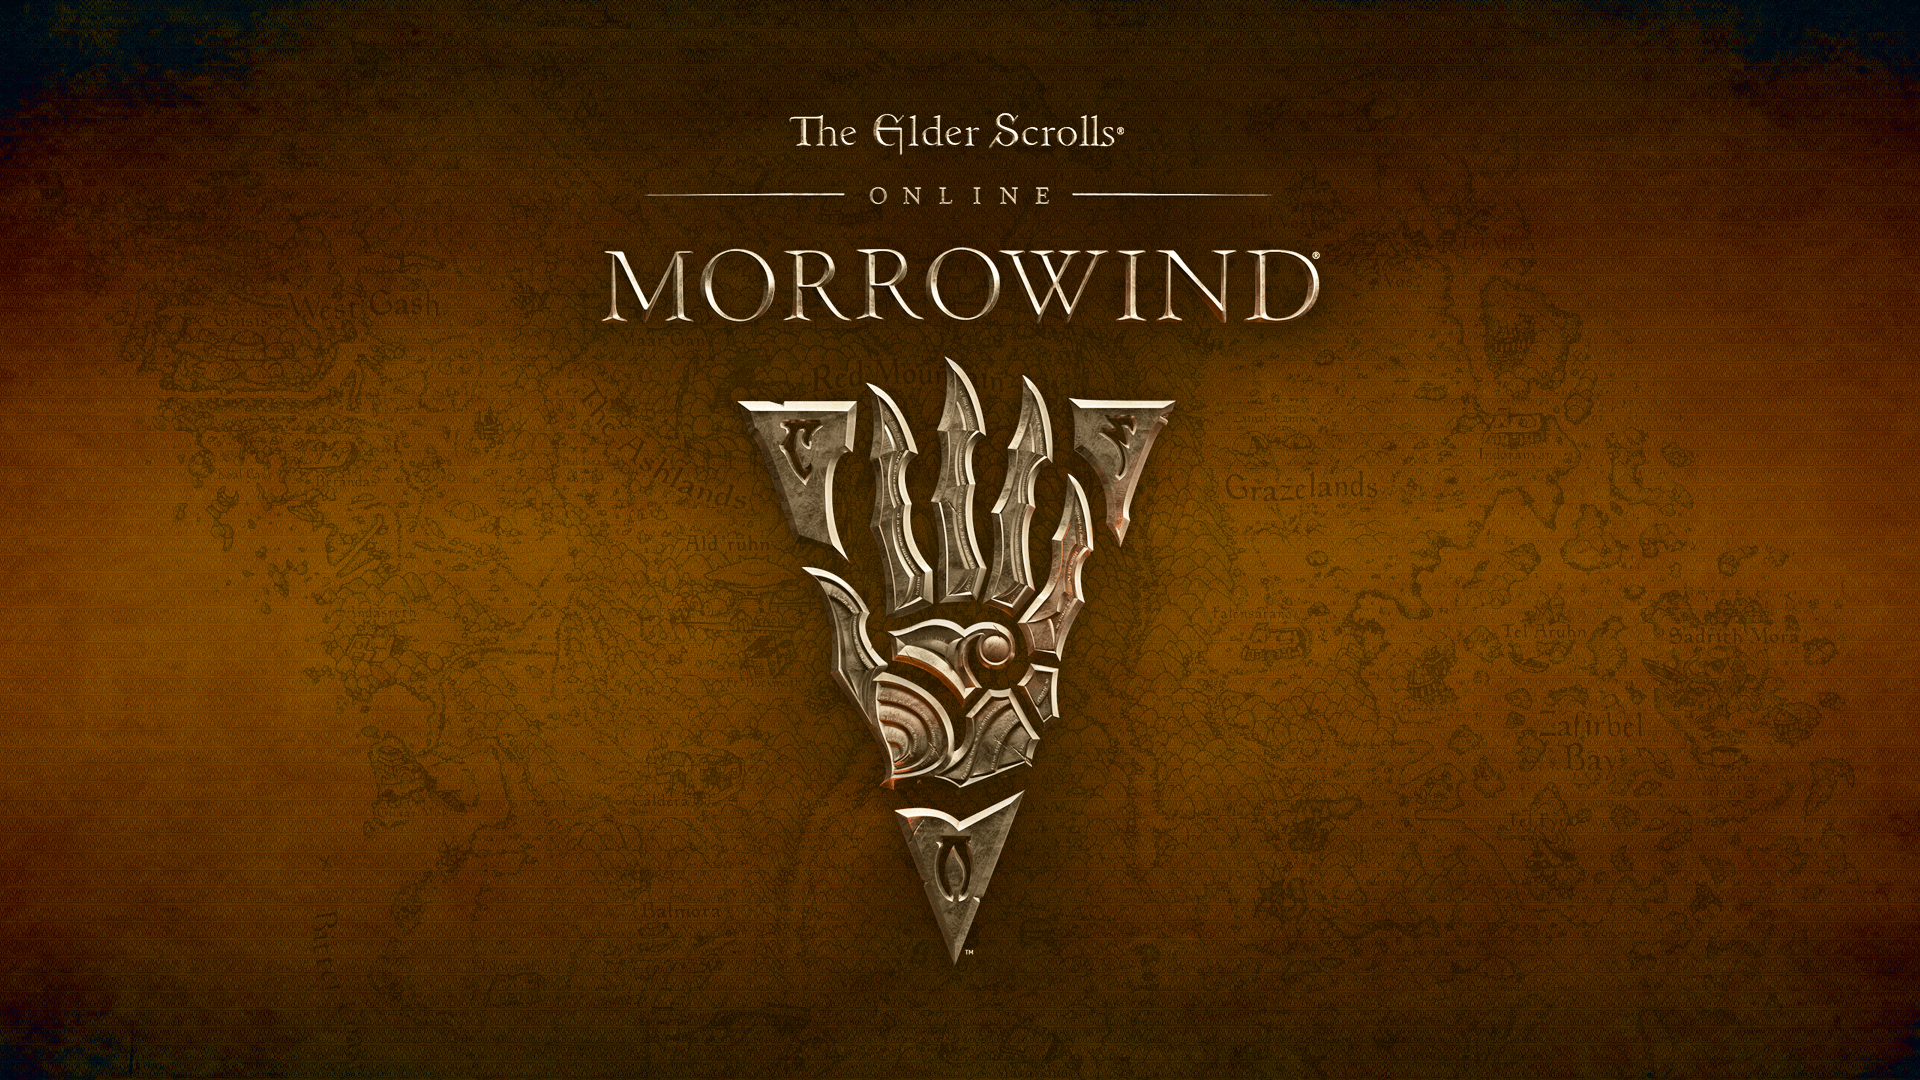 My contribution to the Morrowind hype train. Made for myself but